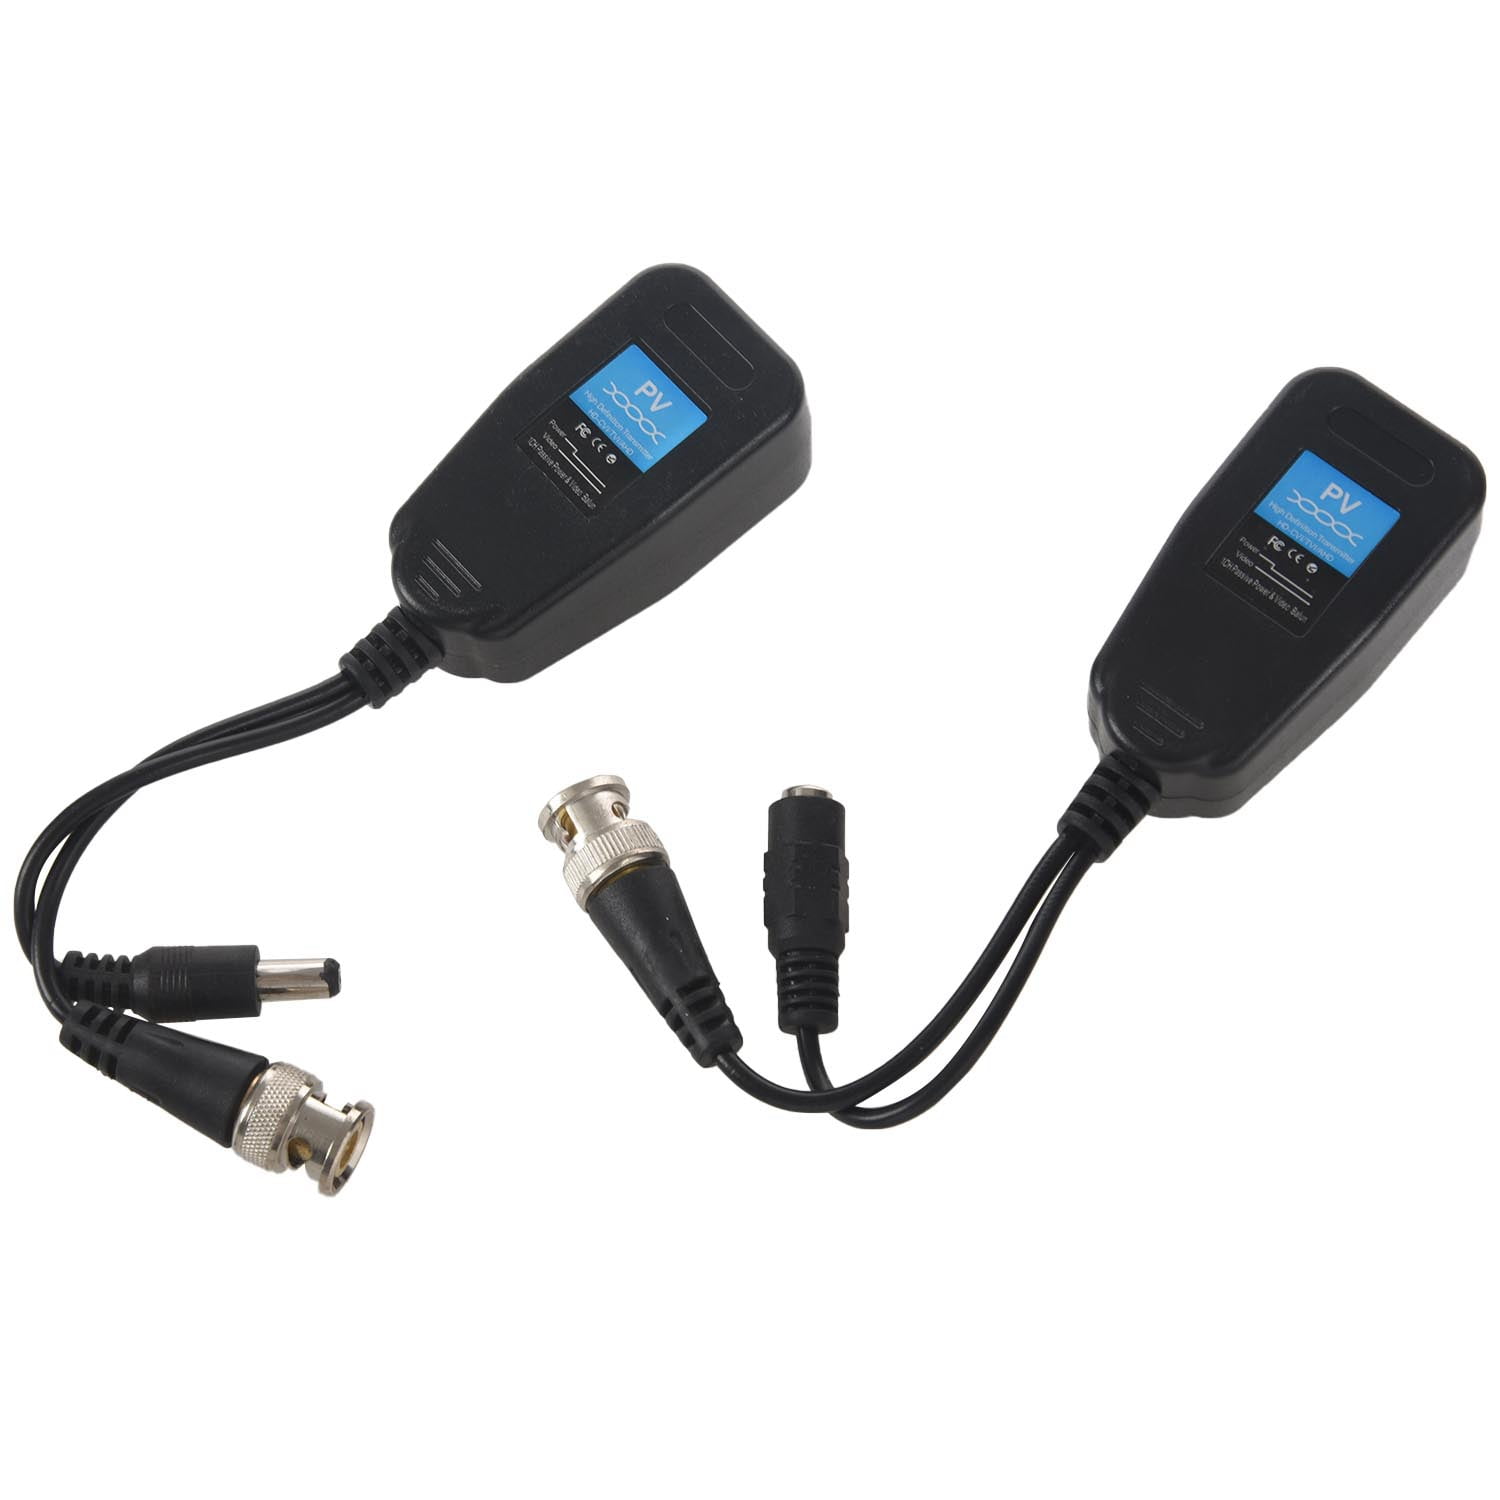 1 Pair Passive Video Balun RJ45 To BNC Converter with Power Connectors 